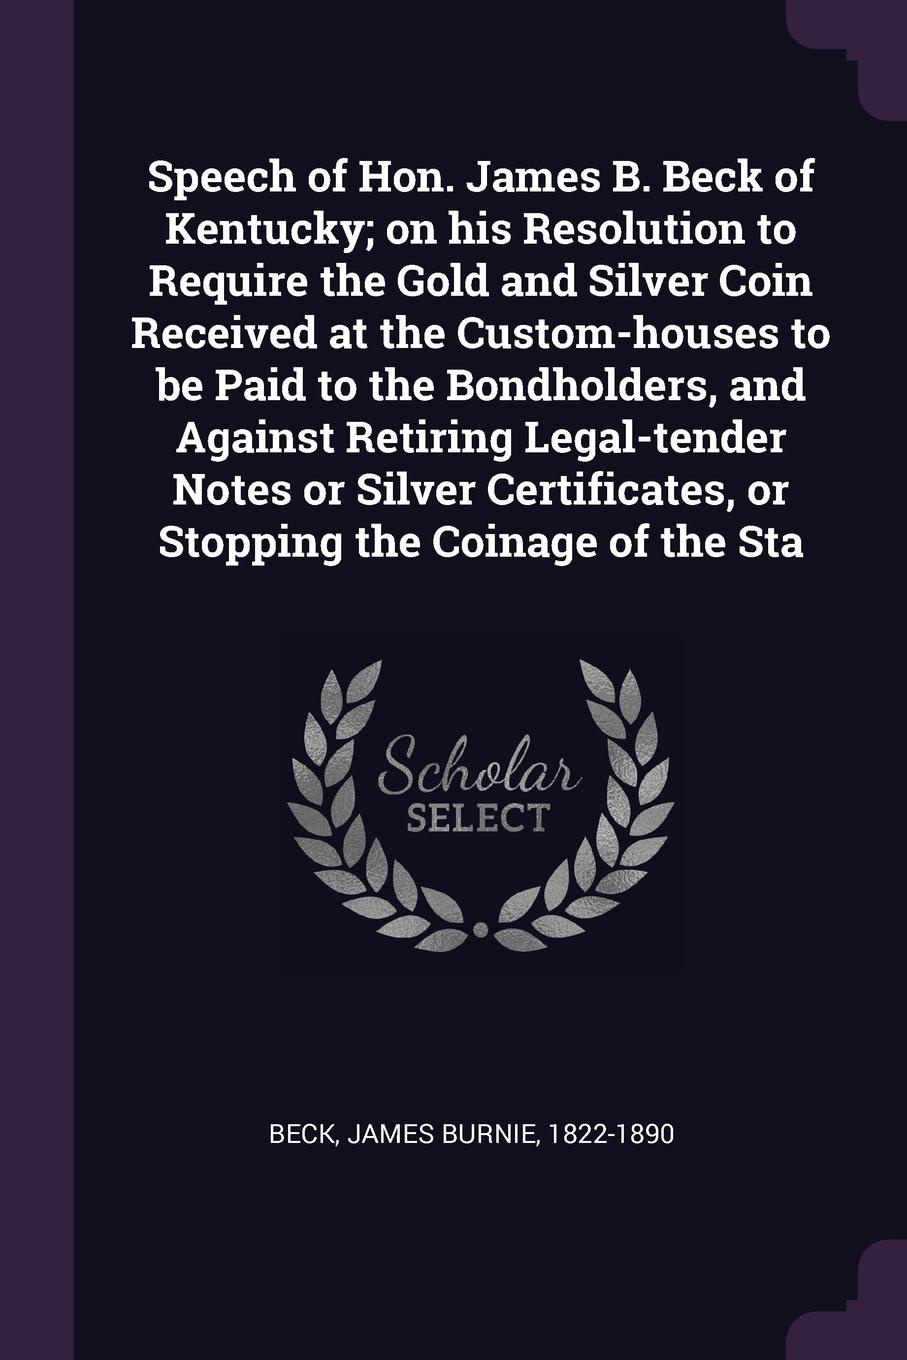 Speech of Hon. James B. Beck of Kentucky; on his Resolution to Require the Gold and Silver Coin Received at the Custom-houses to be Paid to the Bondholders, and Against Retiring Legal-tender Notes or Silver Certificates, or Stopping the Coinage of...